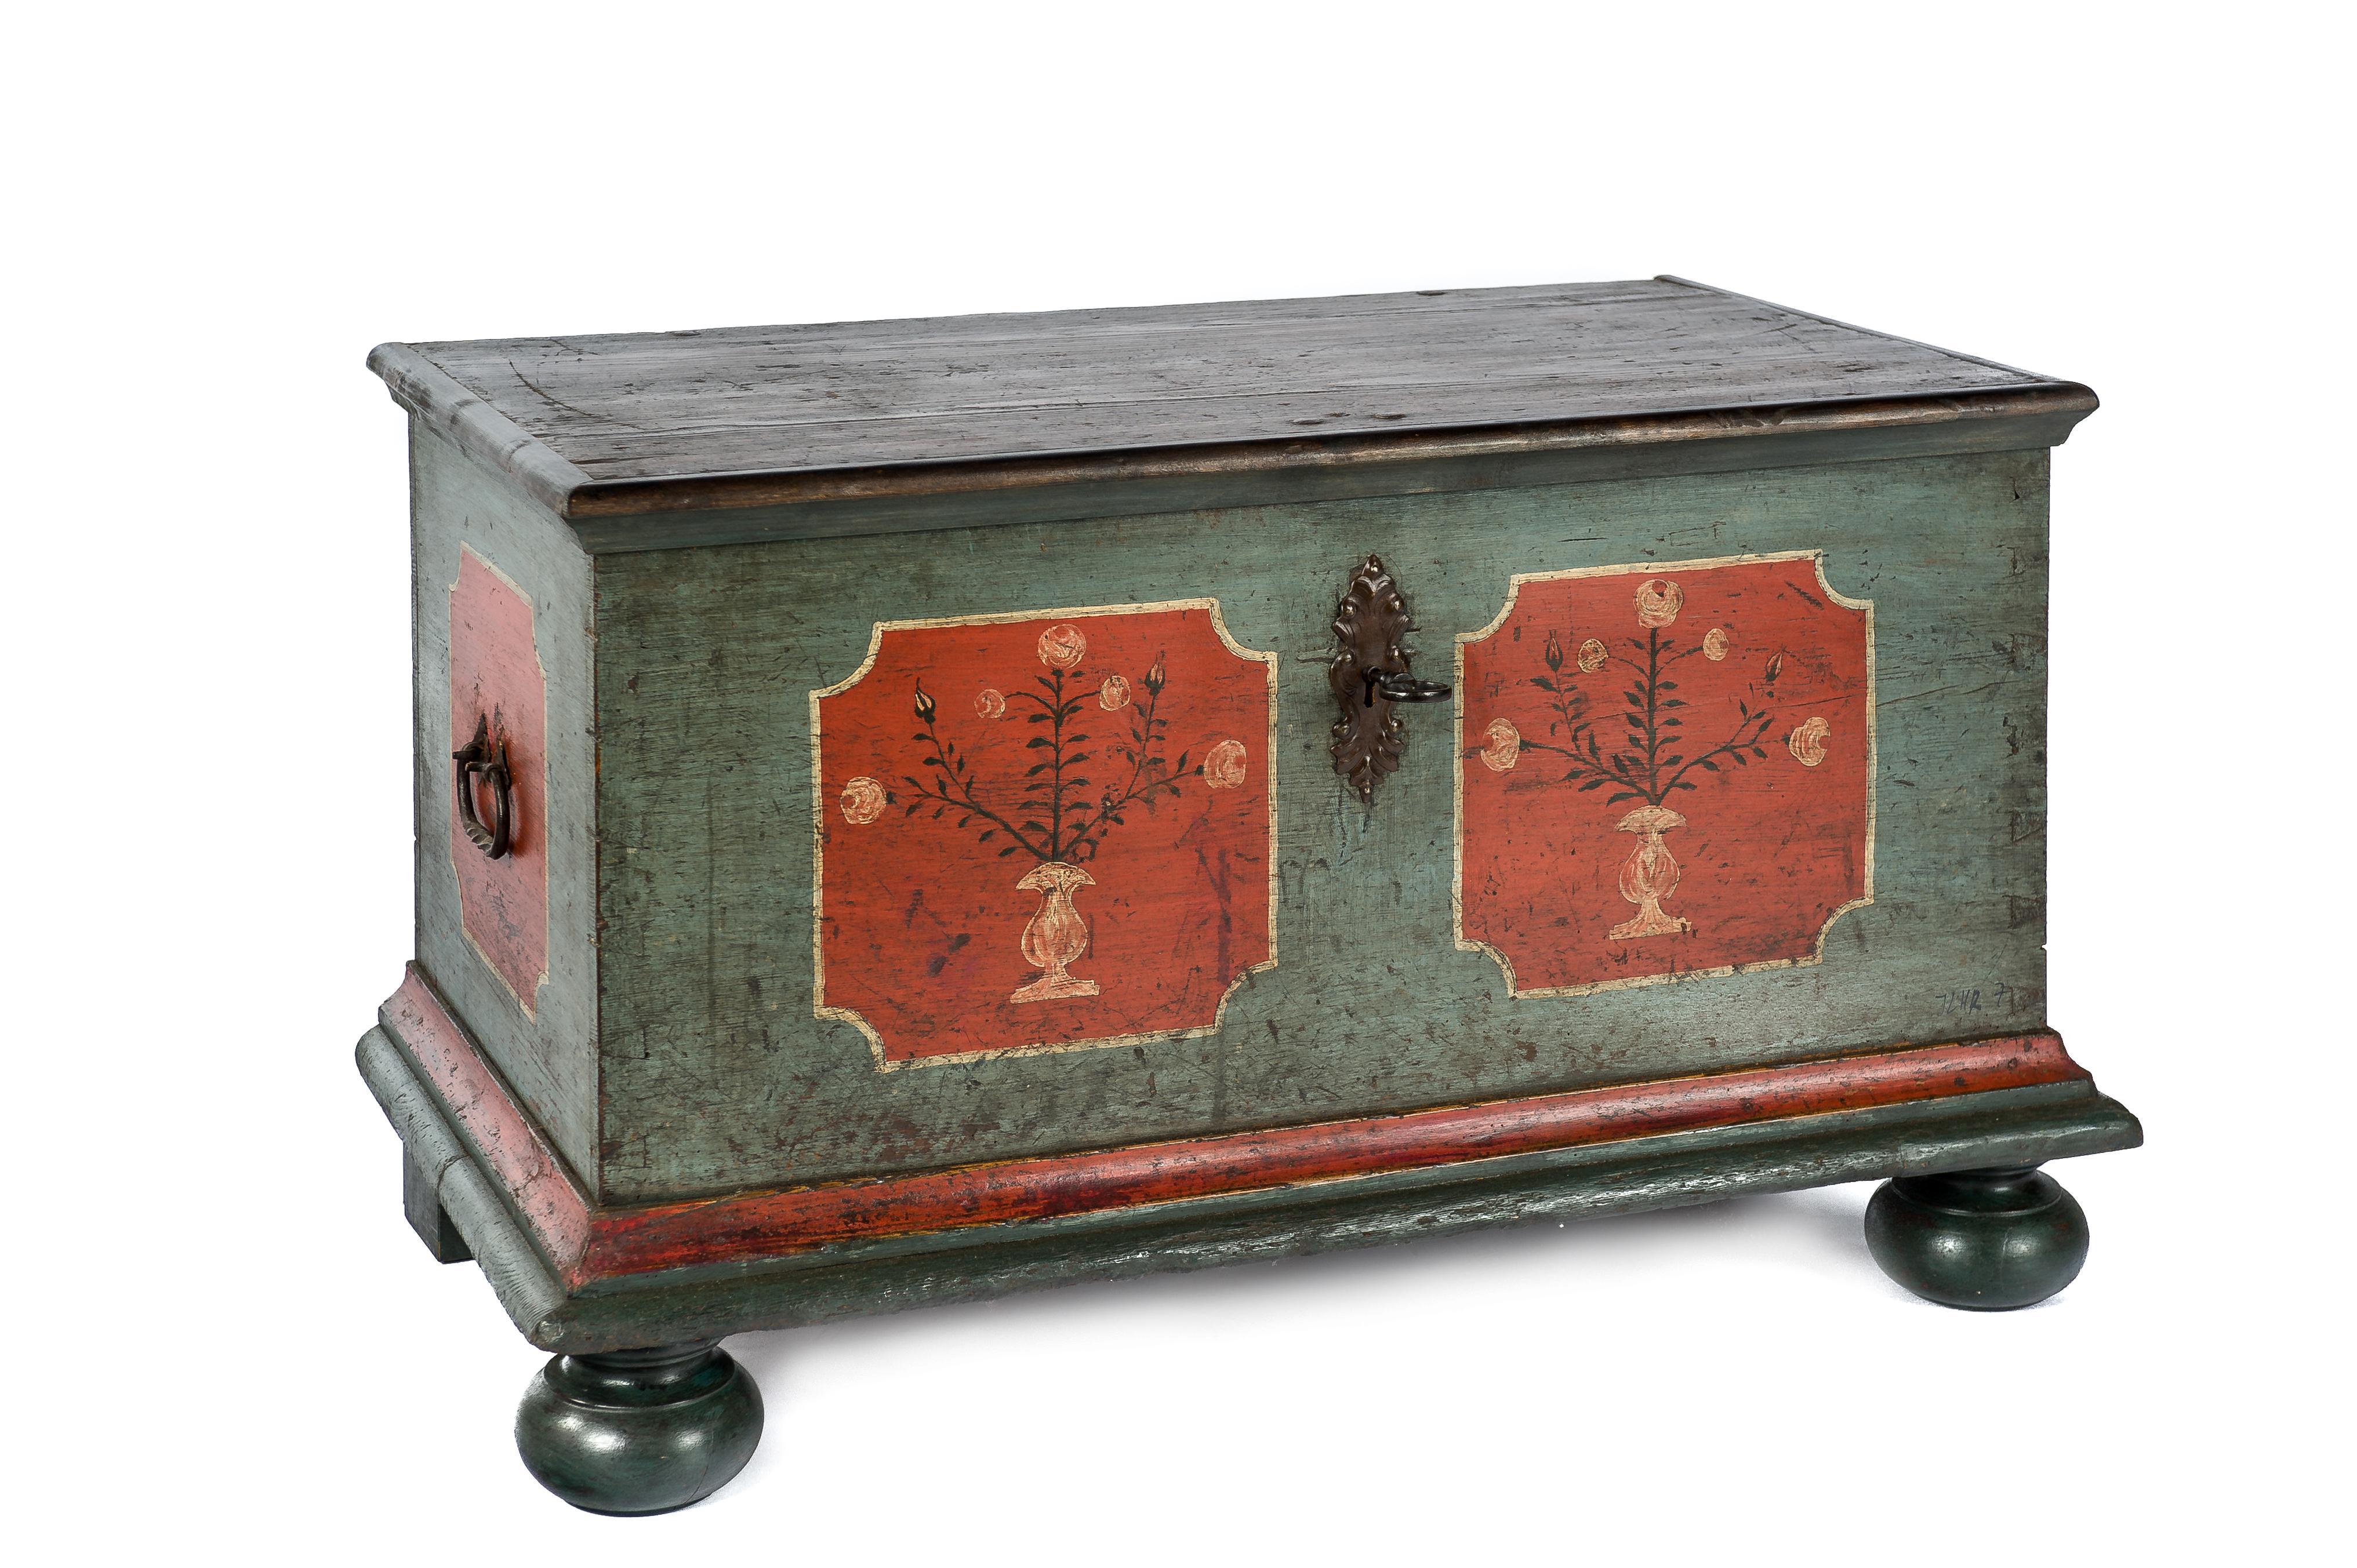 Austrian 18th-Century Solid Pine and Traditional Painted Rural Bohemian Trunk or Chest